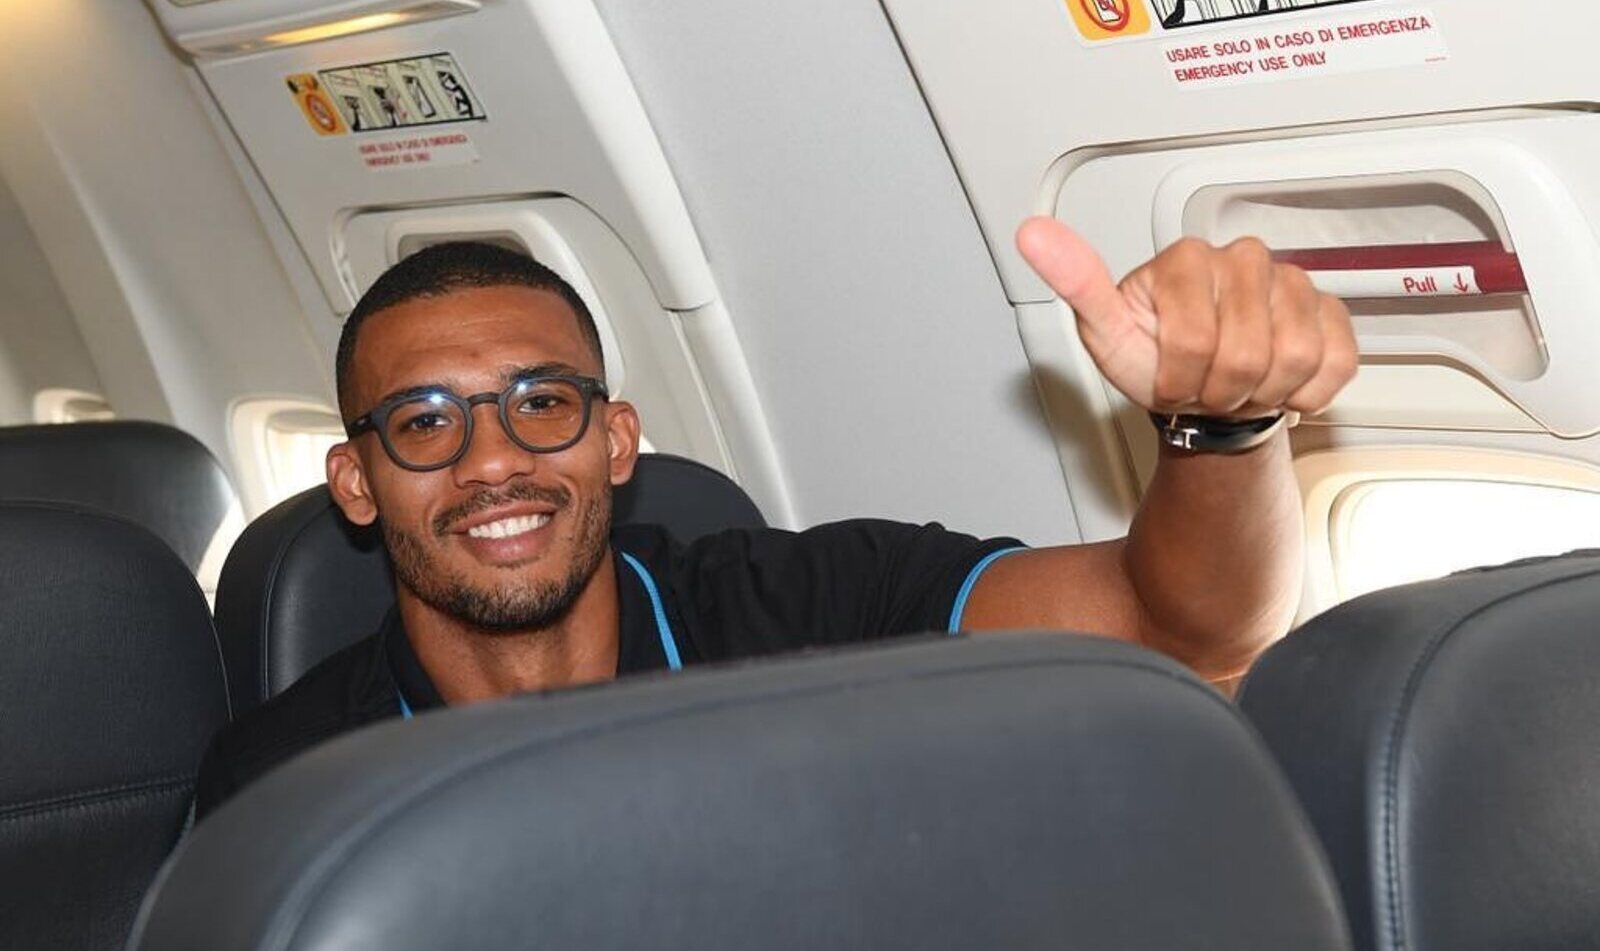 Juan Jesus leaves for the away match in Verona with Napoli: he is among the squads